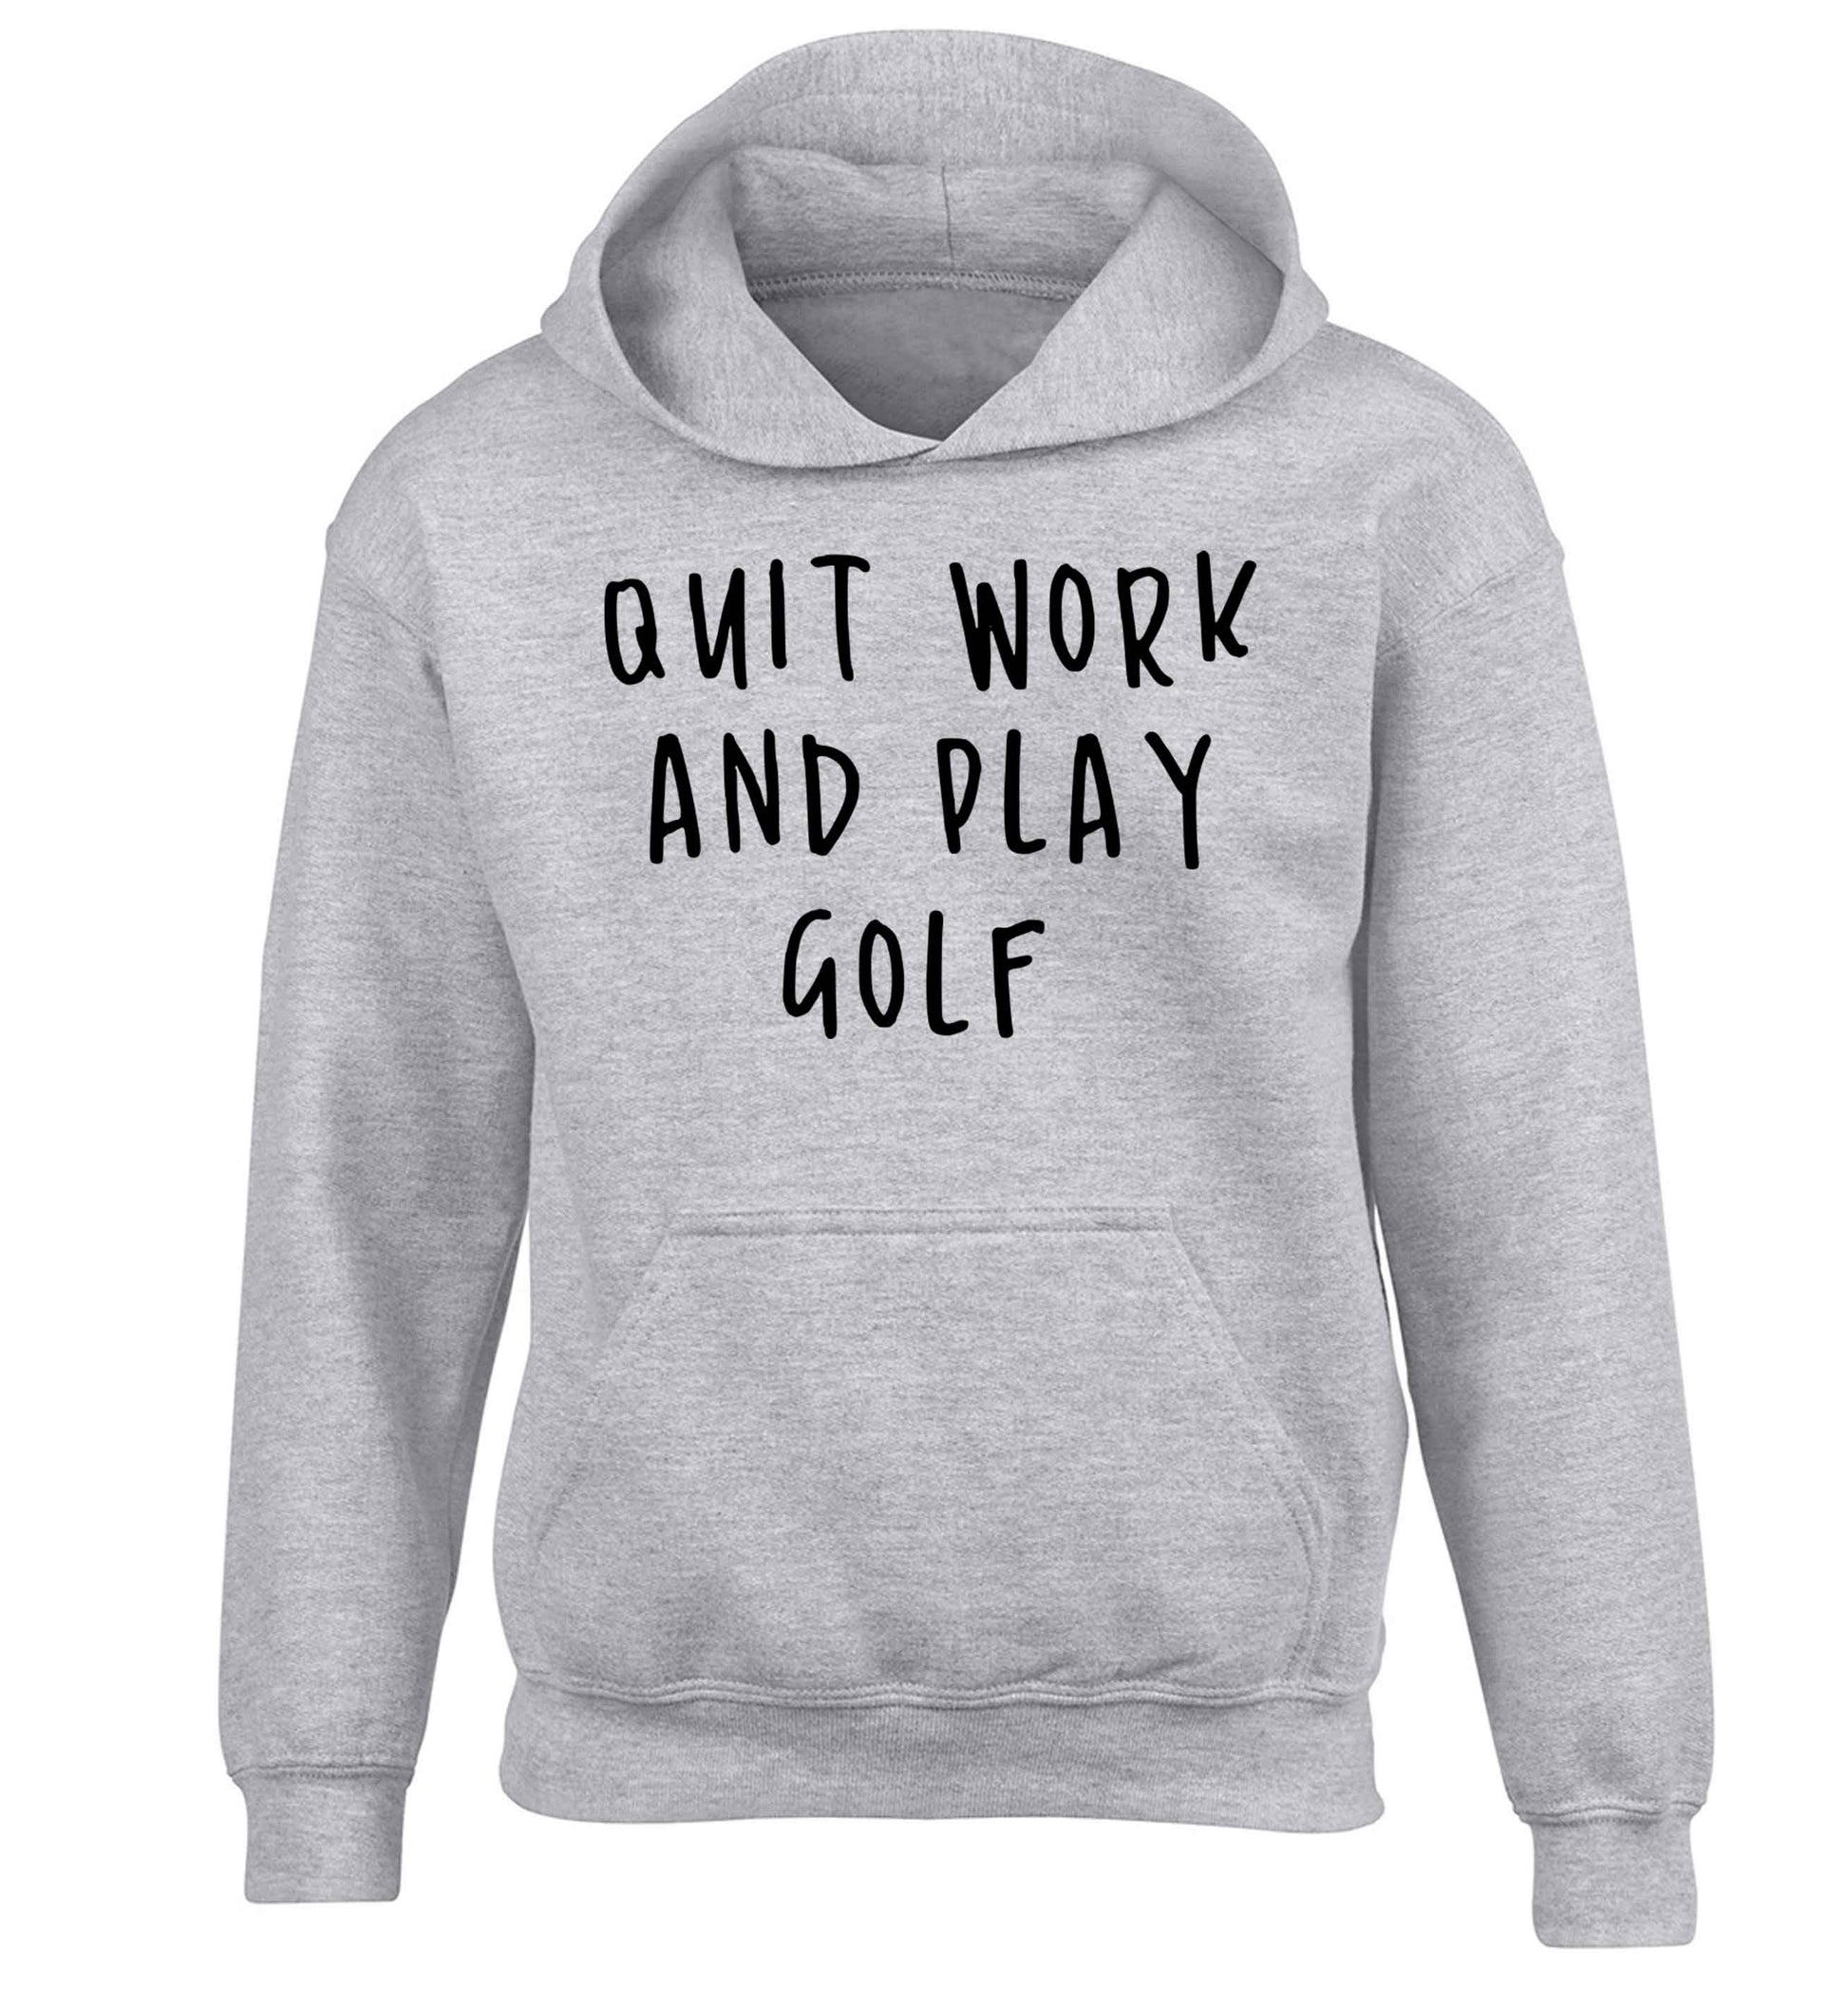 Quit work and play golf children's grey hoodie 12-13 Years